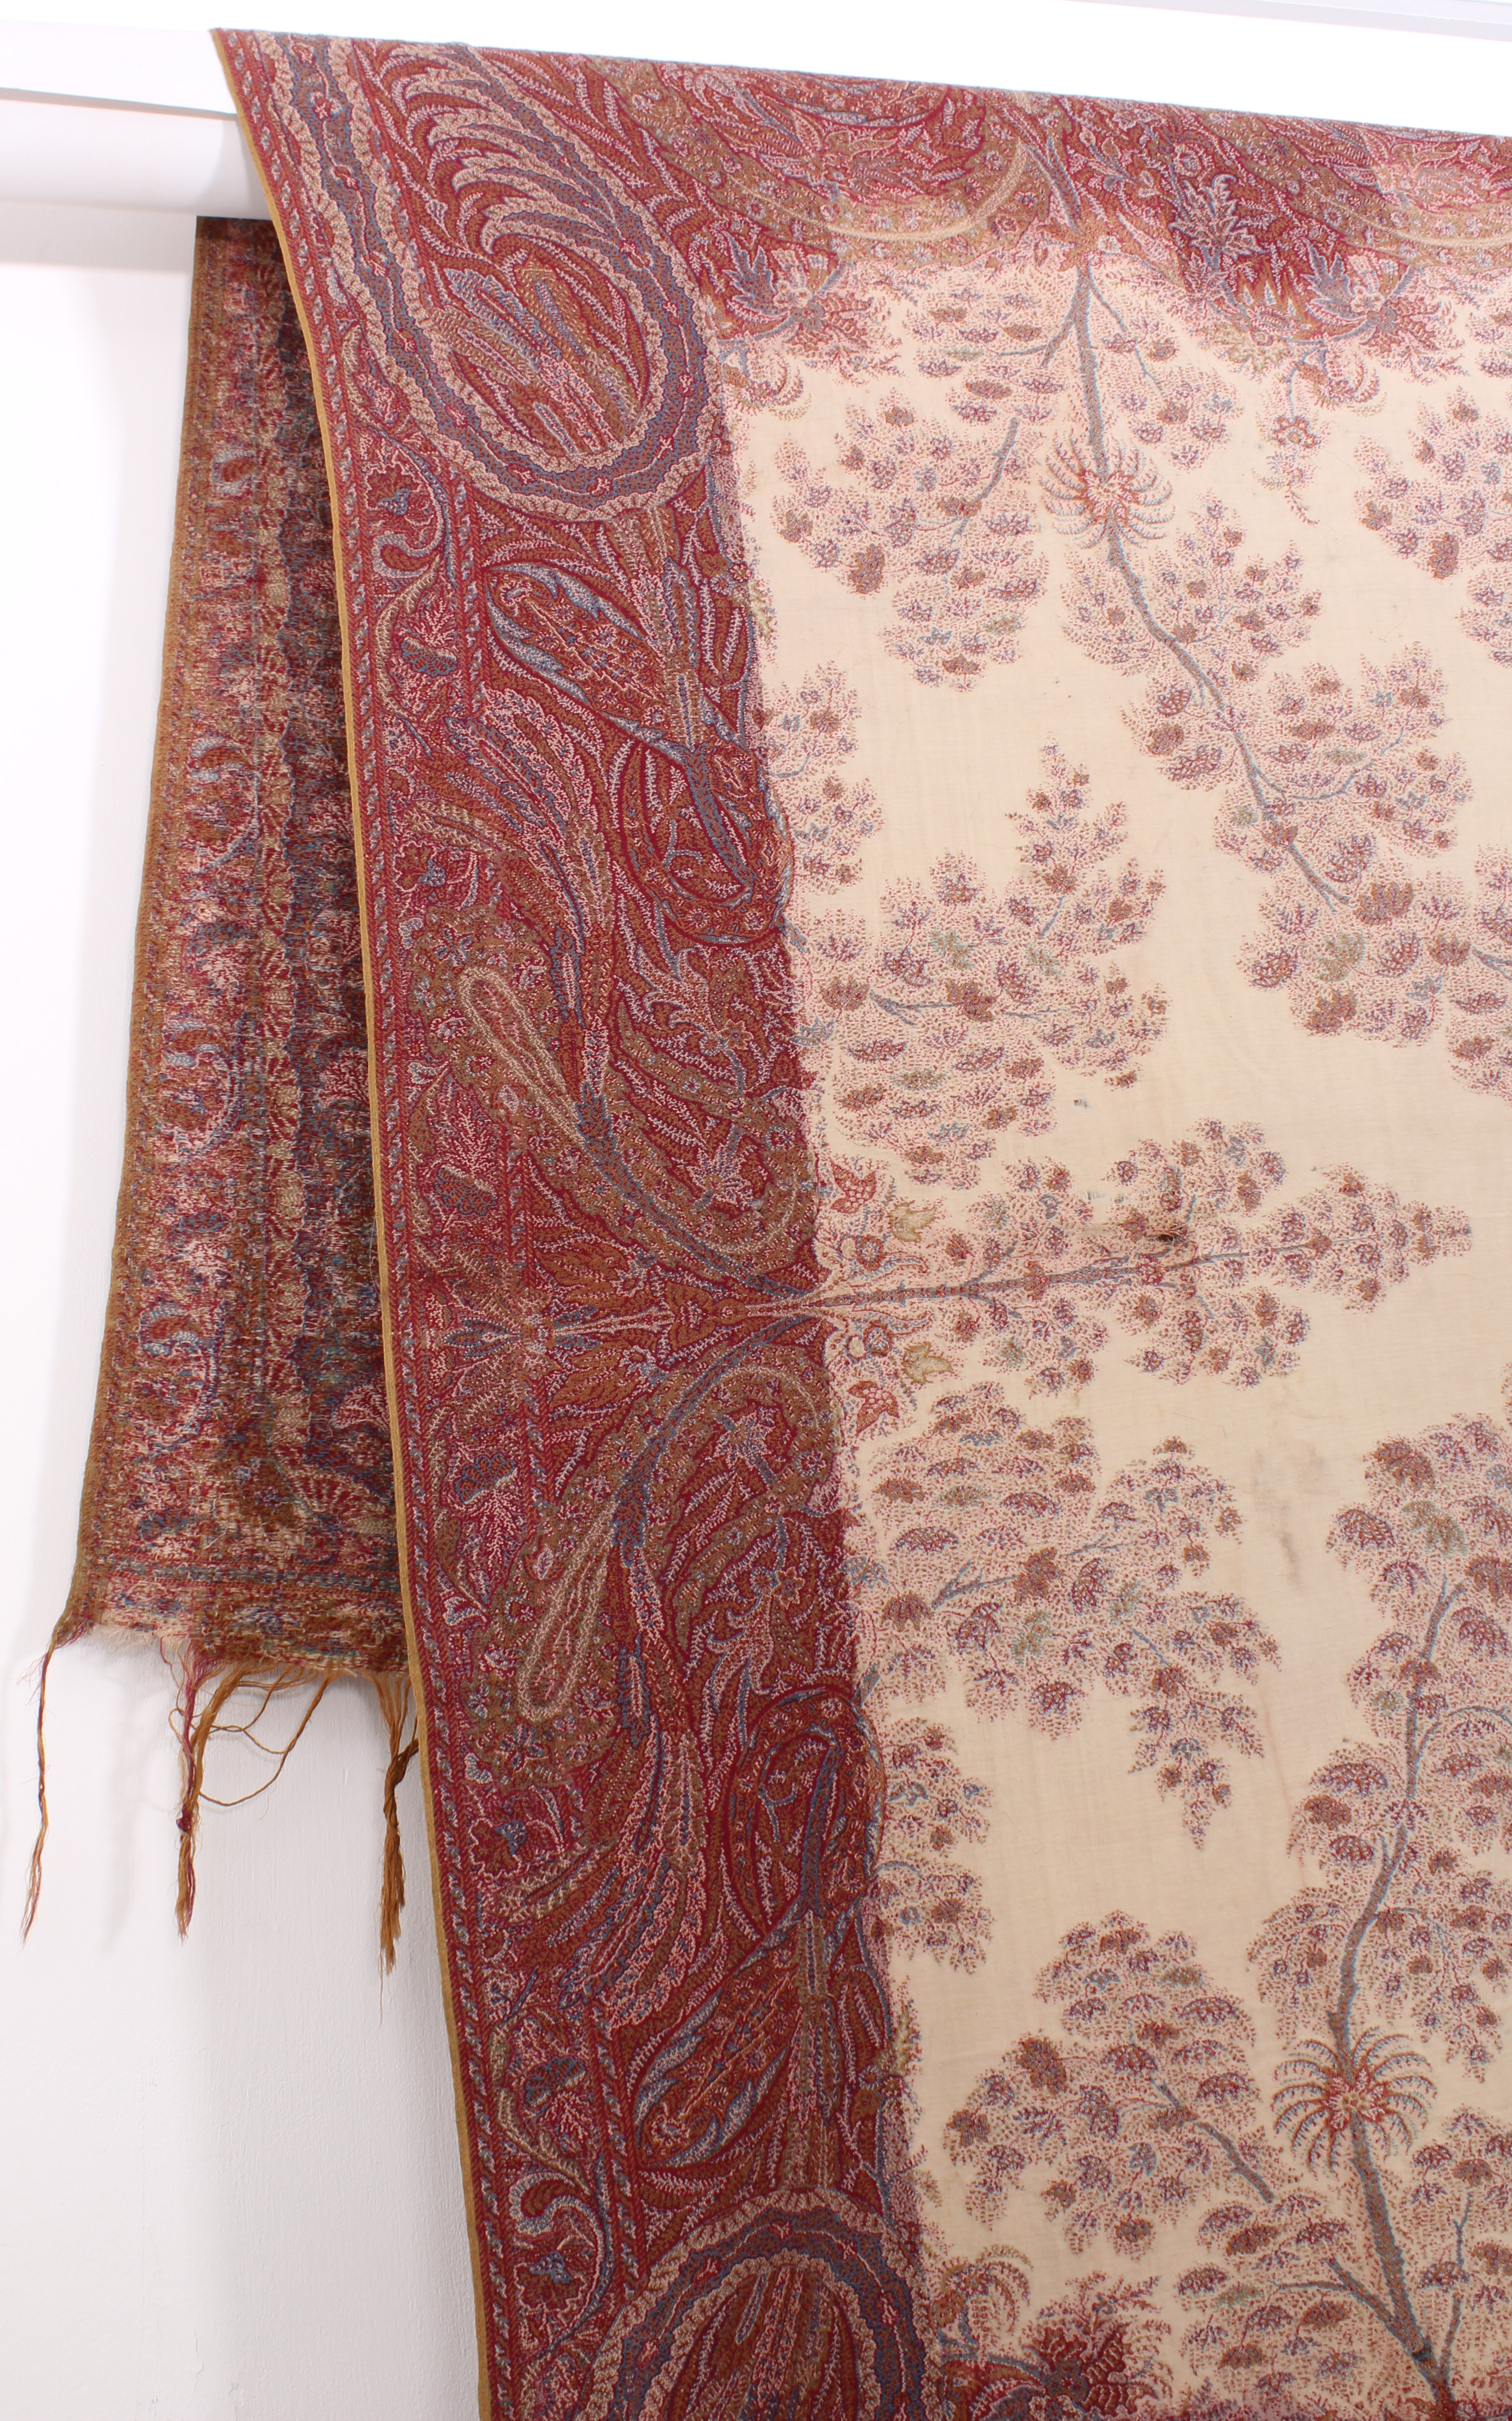 An antique Paisley shawl - probably early 20th century, with central ivory field decorated with - Image 3 of 4